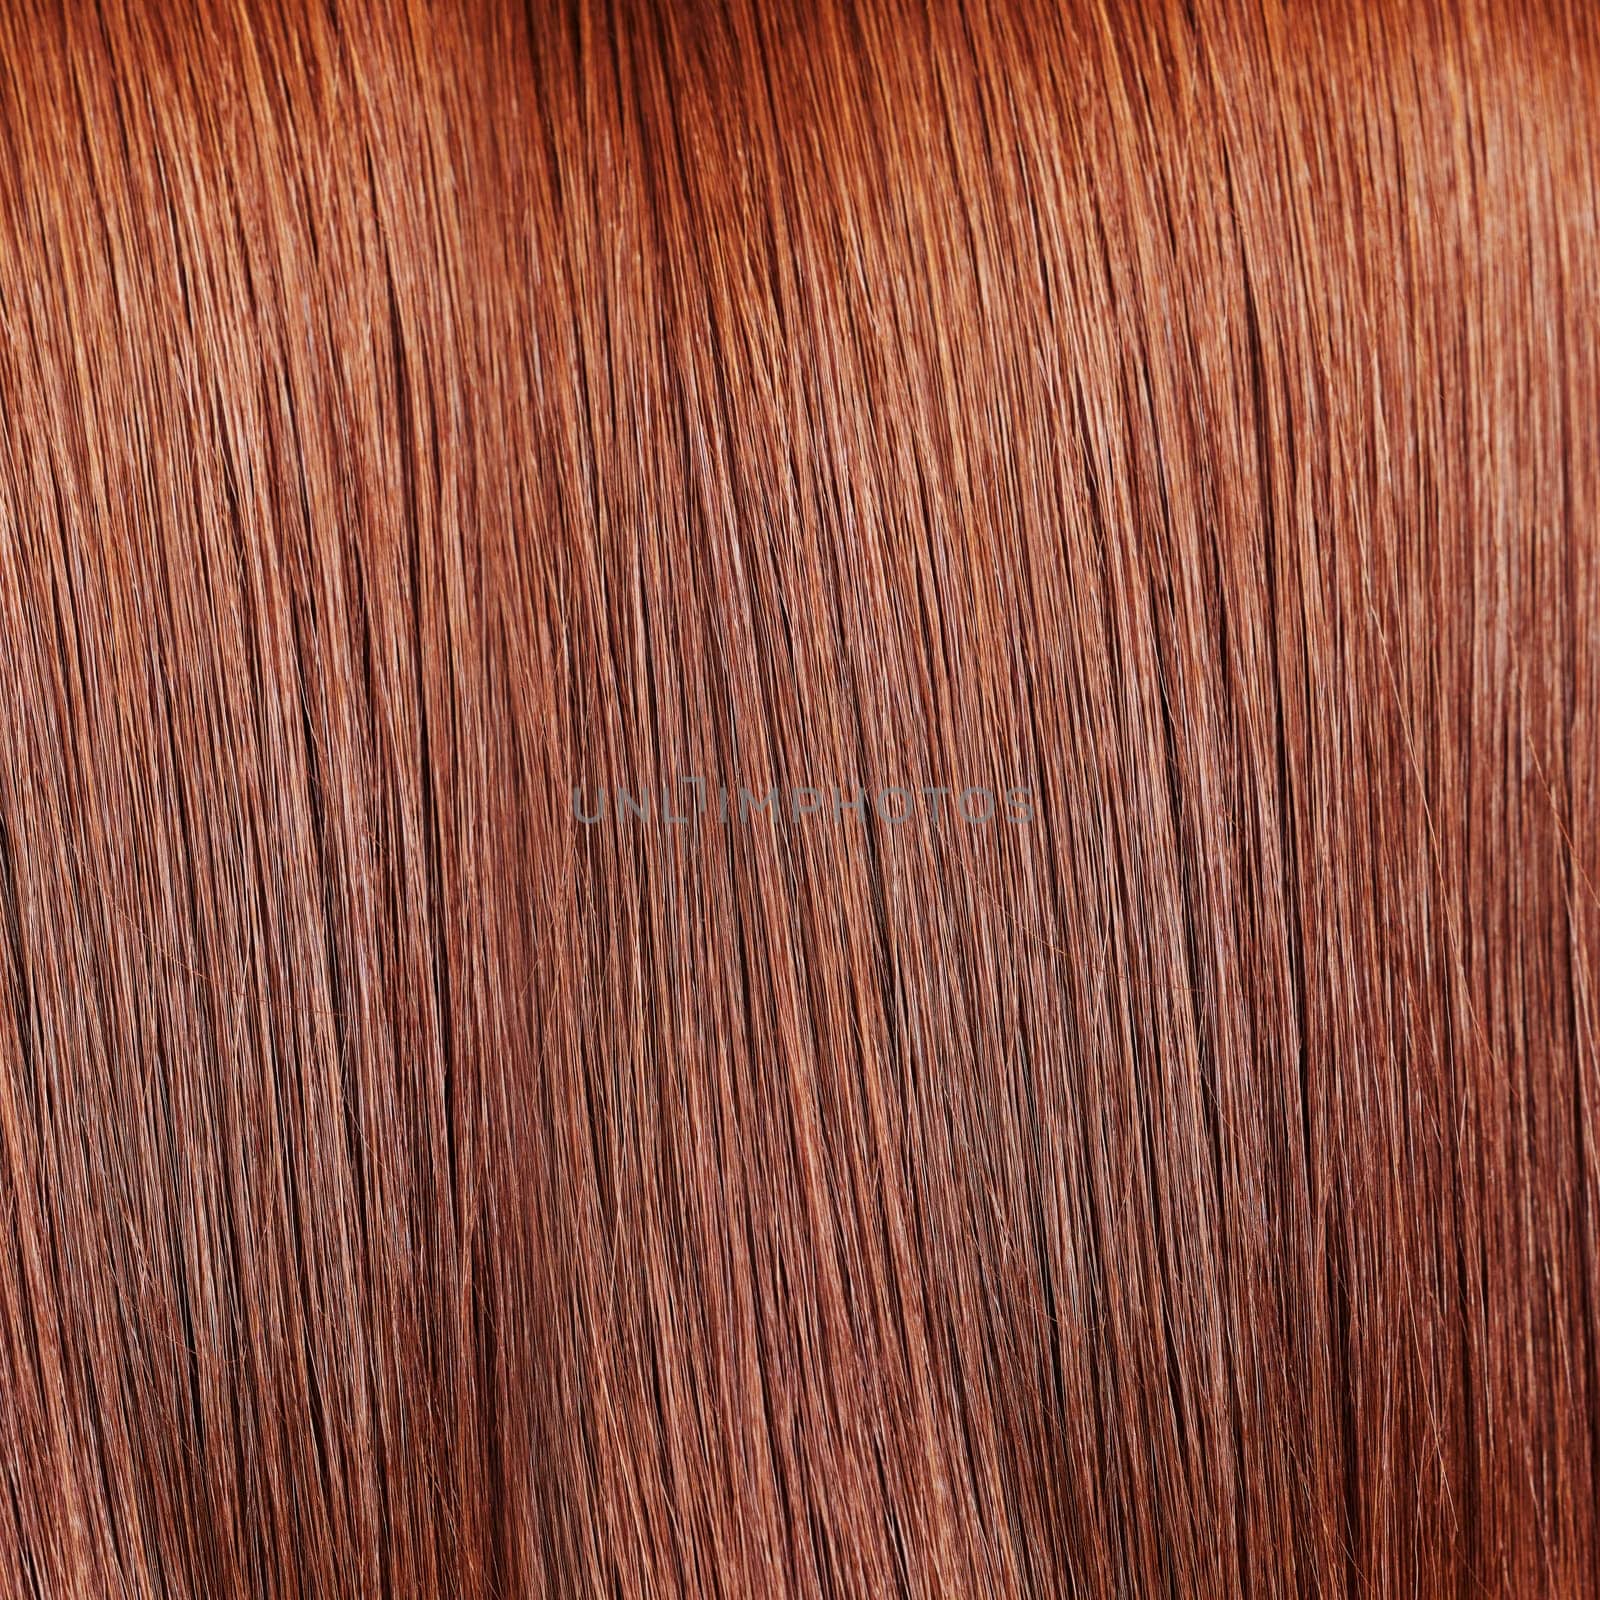 Zoom, textures and beauty with closeup of hair for shampoo, keratin and salon treatment. Glamour, colorful and shine with straight brunette extensions for growth, strand and pattern for background by YuriArcurs